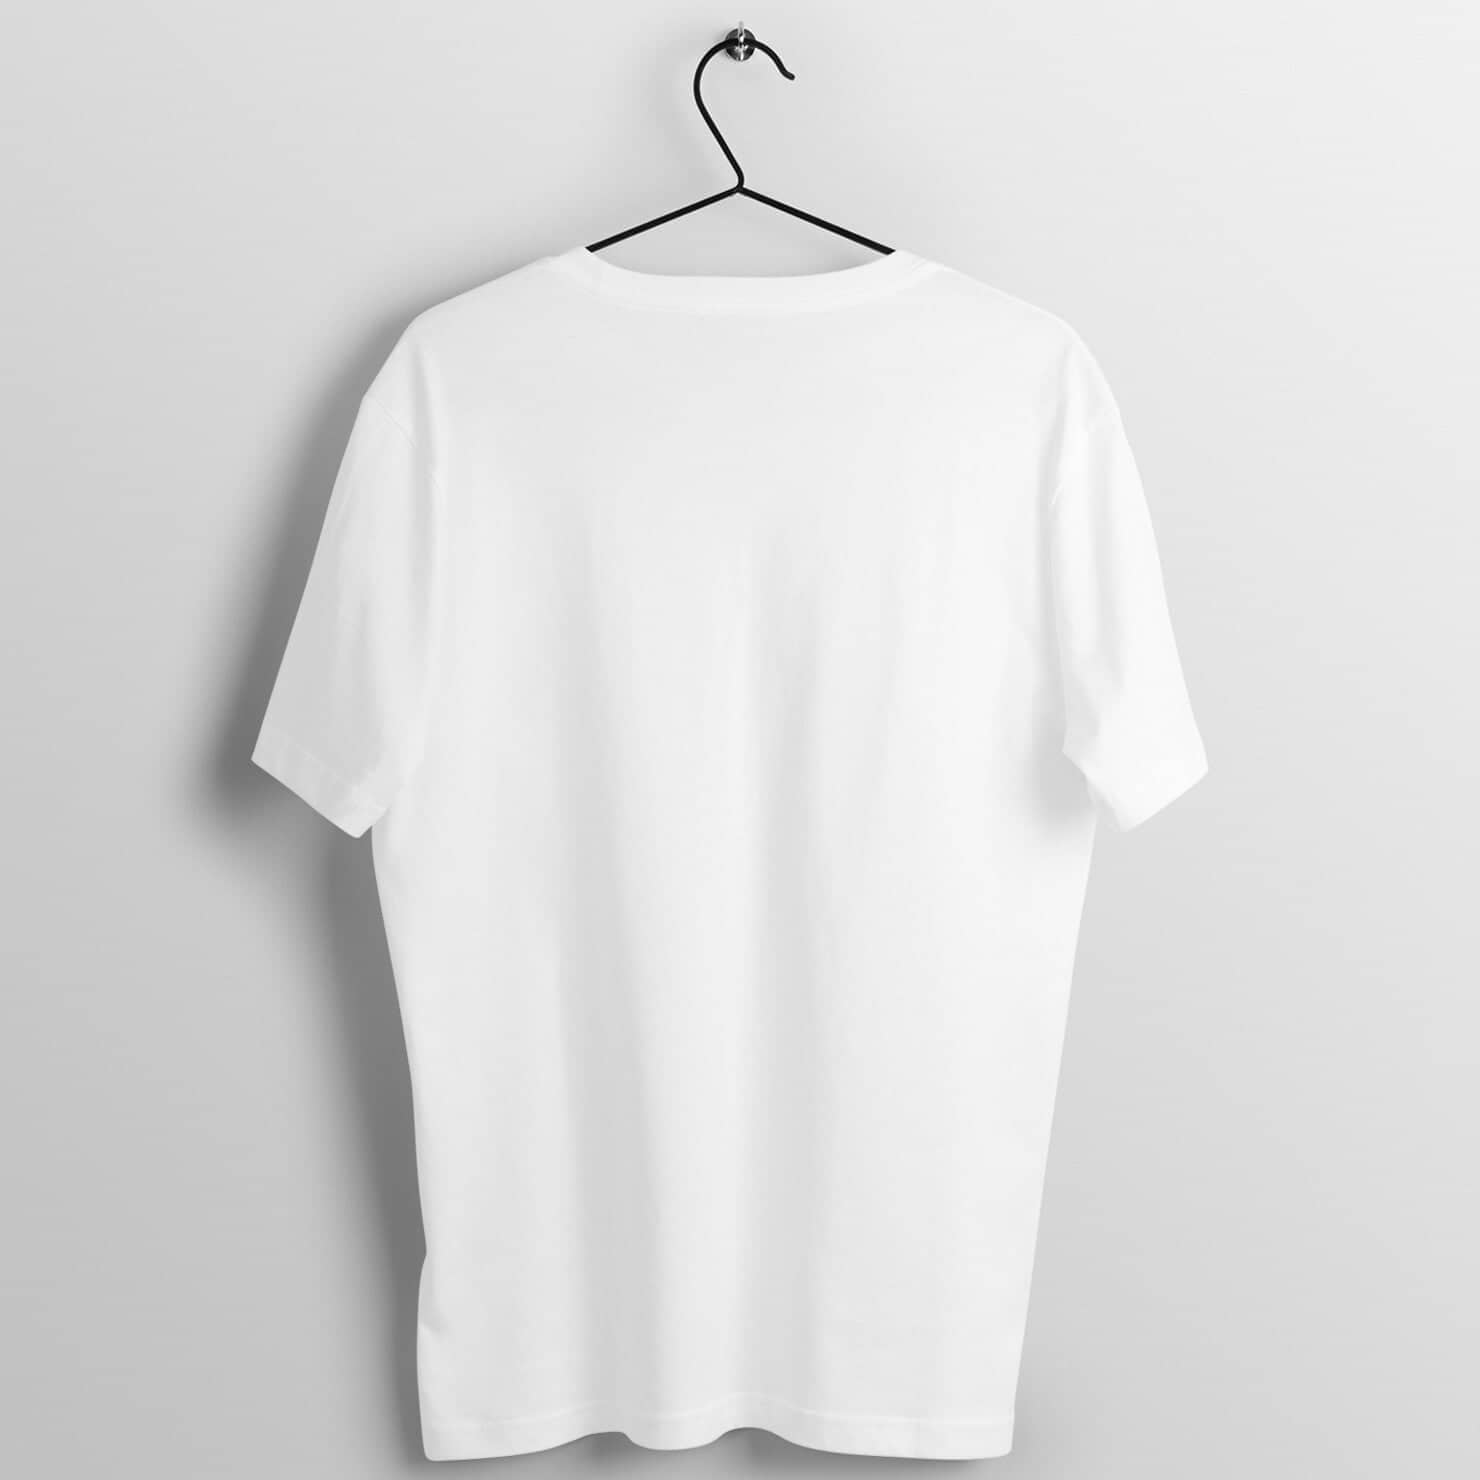 If Lost Return to Tom Holland Funny White T Shirt for Women freeshipping - Catch My Drift India